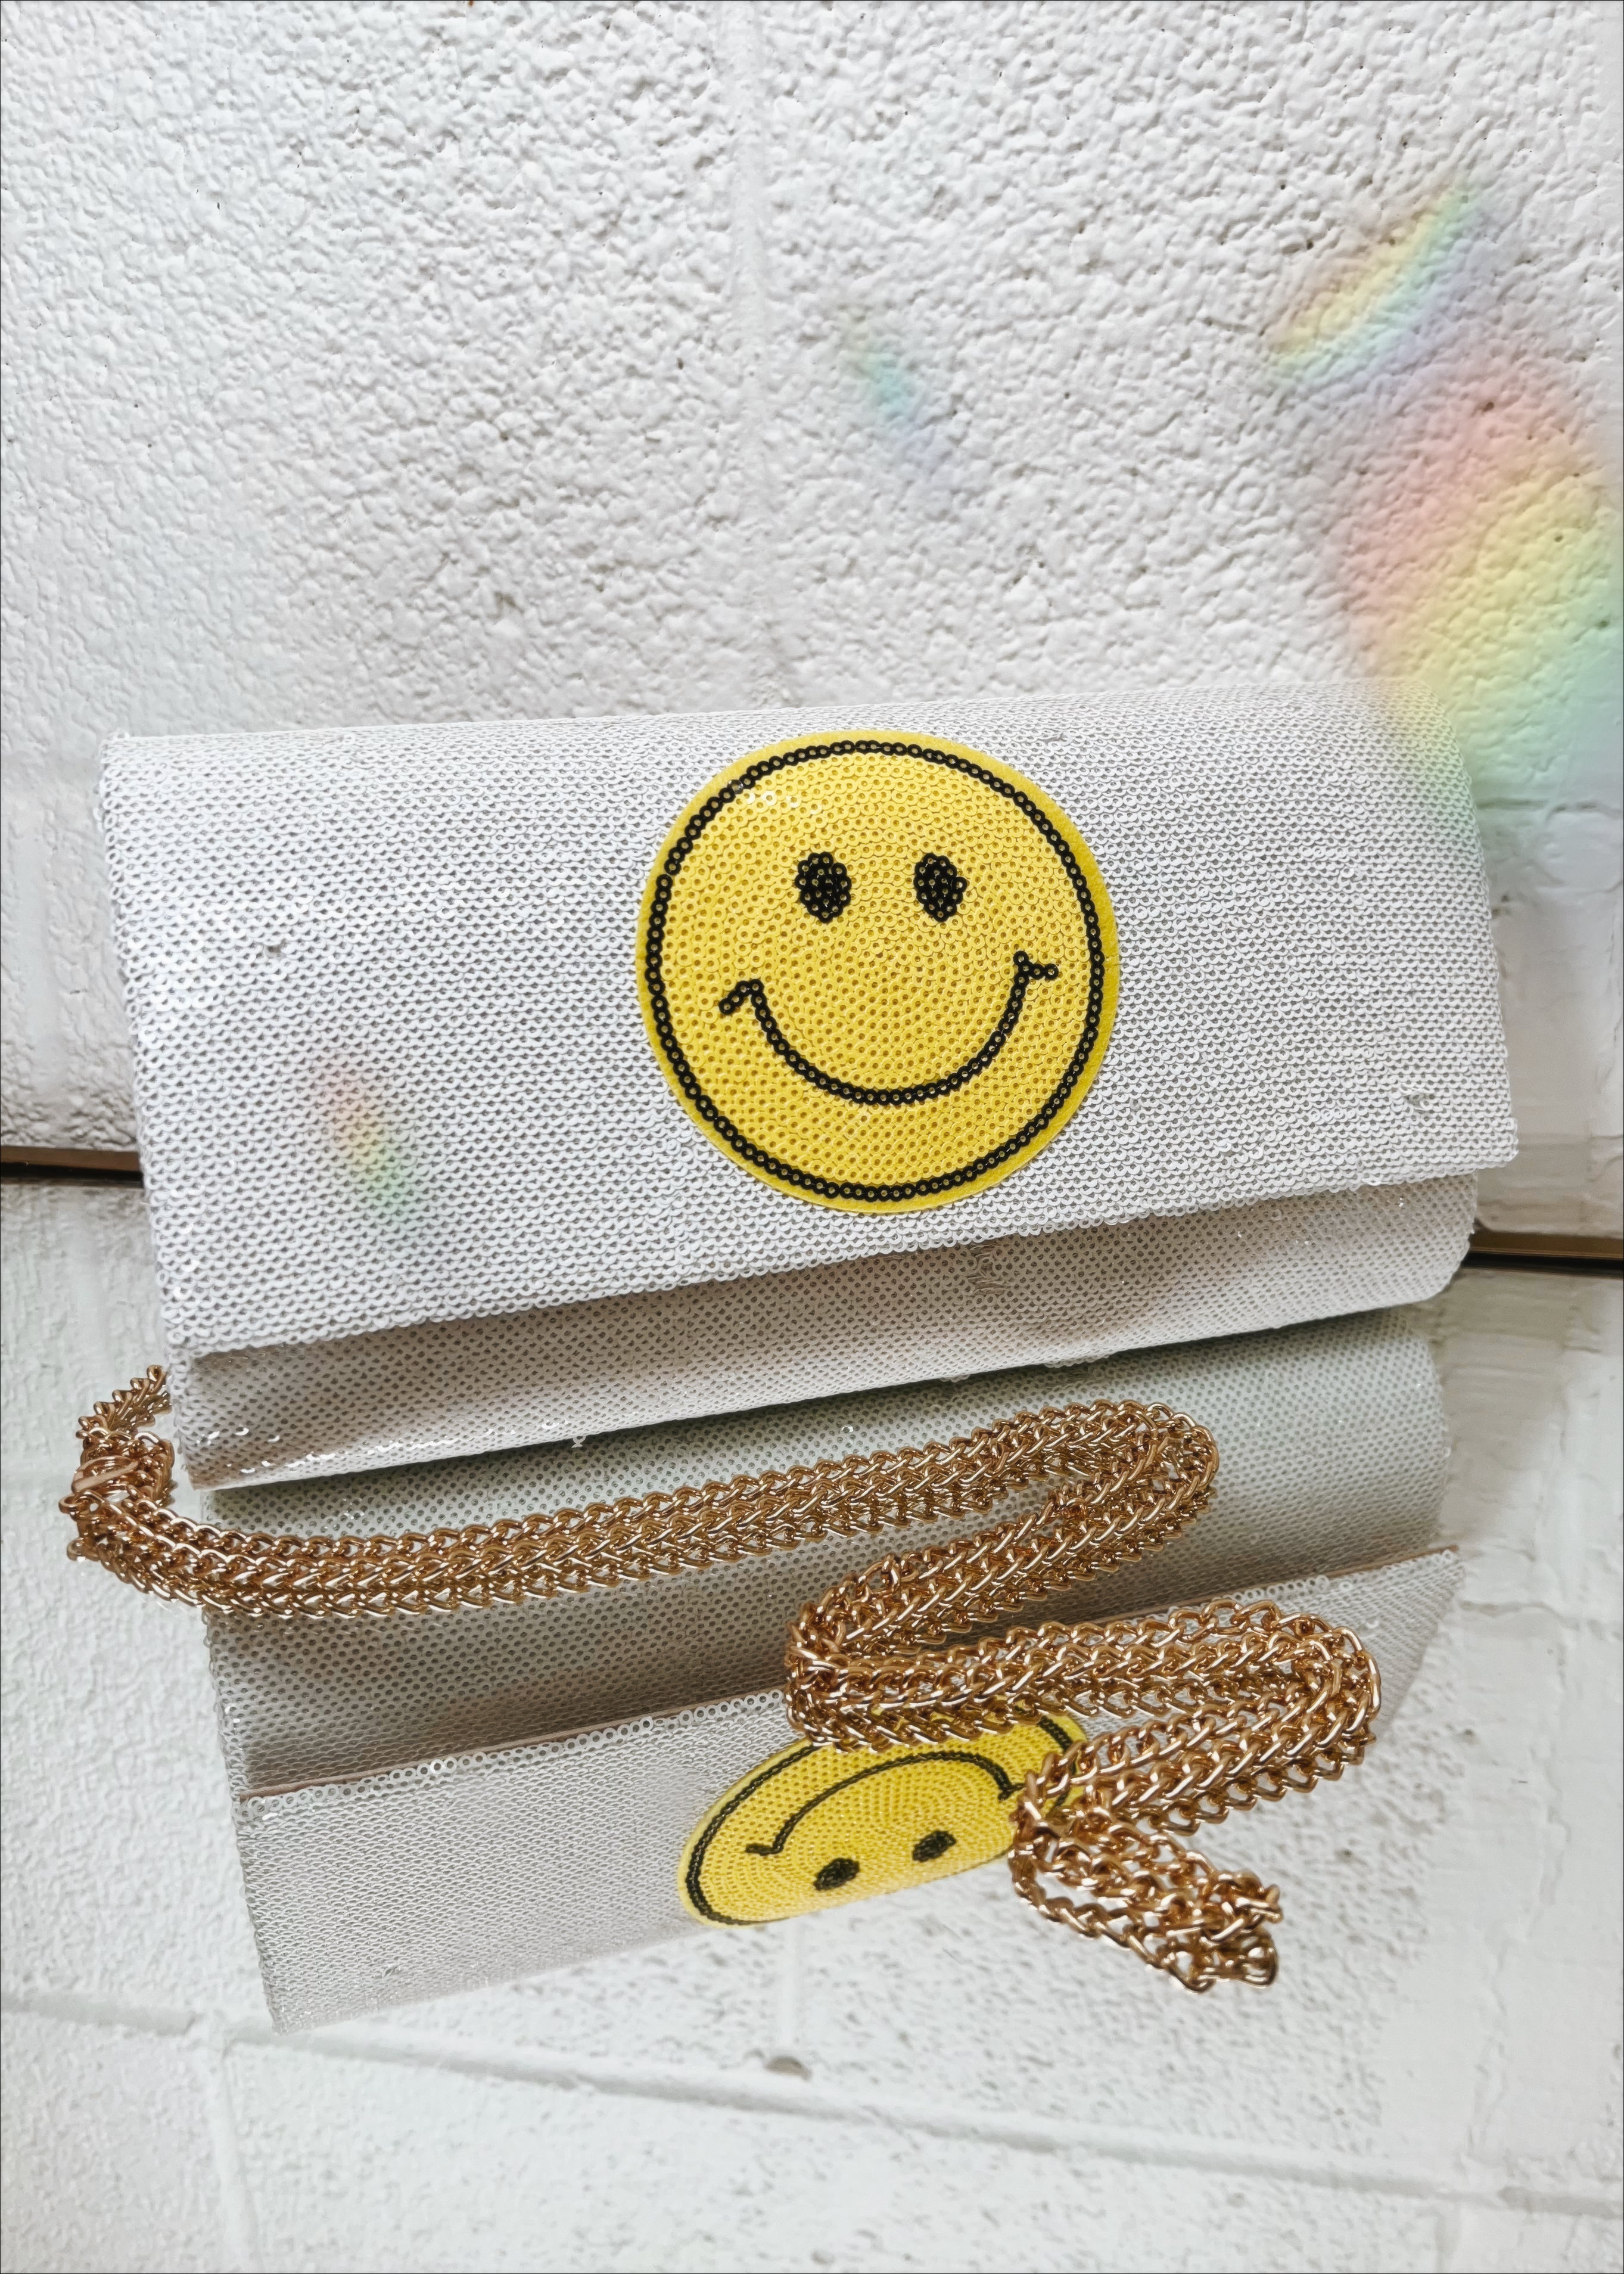 Buy Smiley Plastic Bag Thank You Card Online in India - Etsy